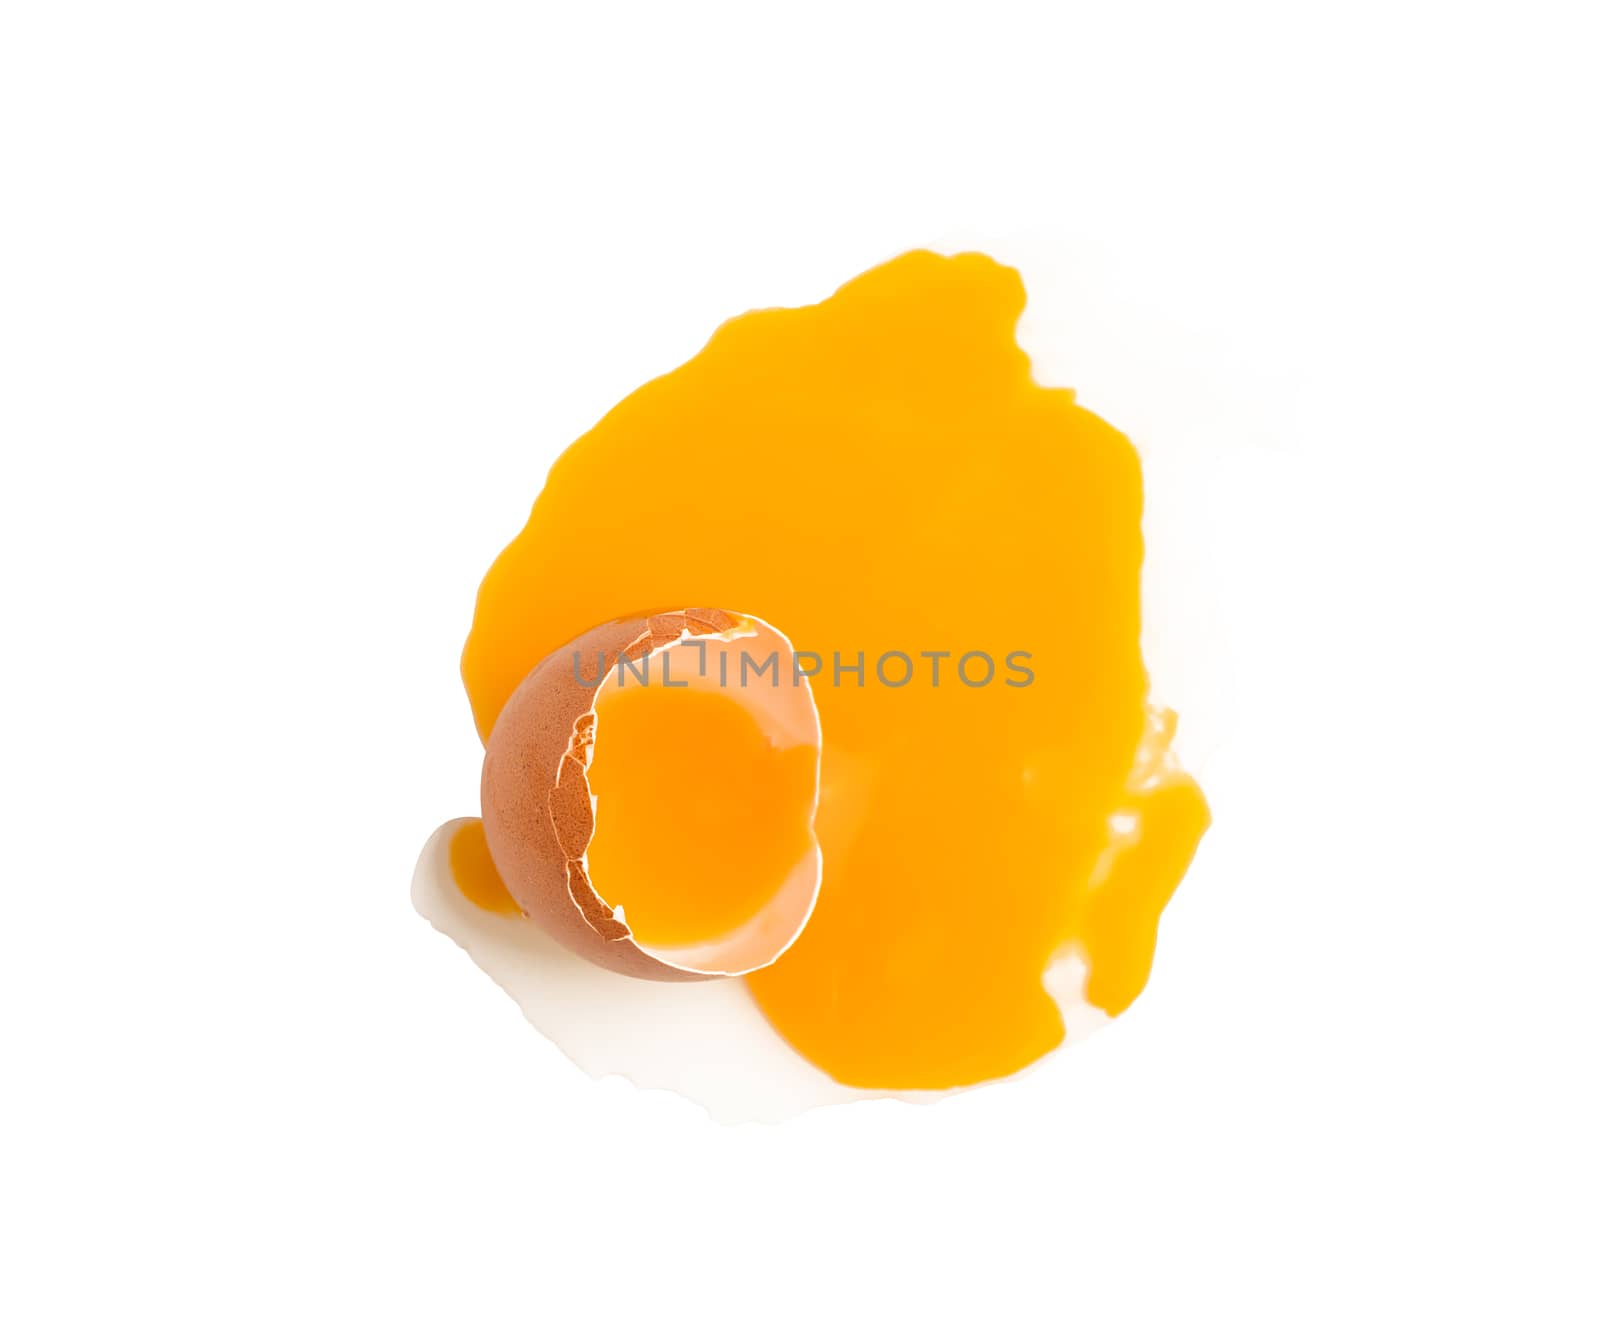 Egg broken shell isolated on the white background with clipping paths